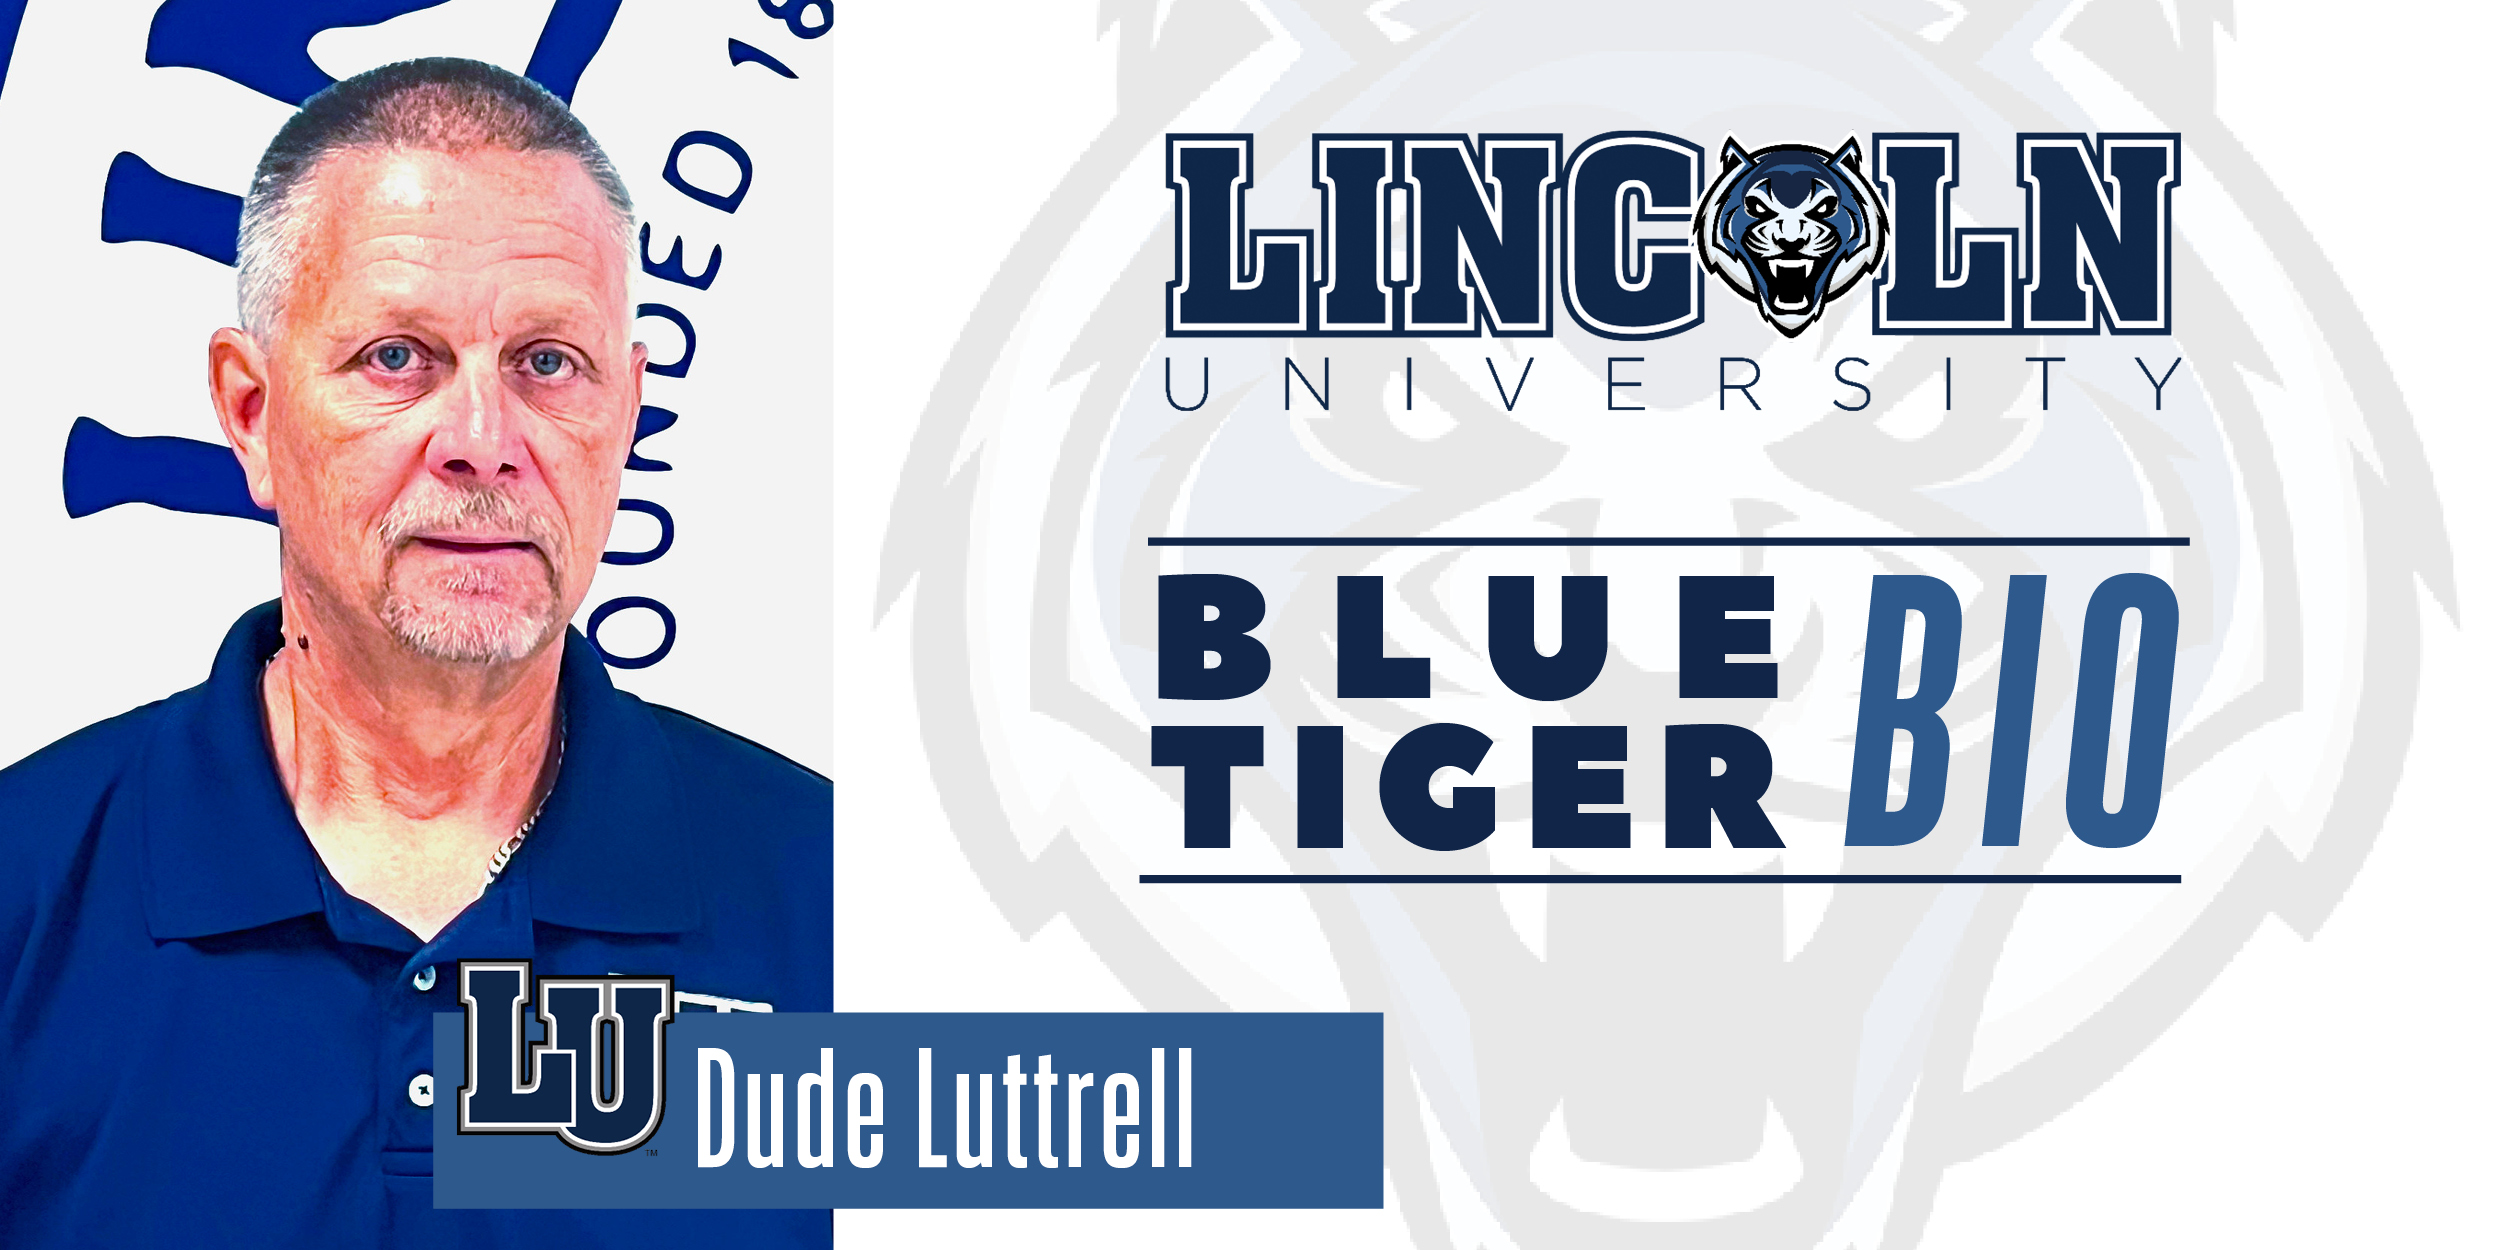 Facilities Manager Dude Luttrell served over two decades as the operational backbone at Lincoln University, overseeing a wide range of responsibilities to ensure the safety and efficiency of the entire campus.